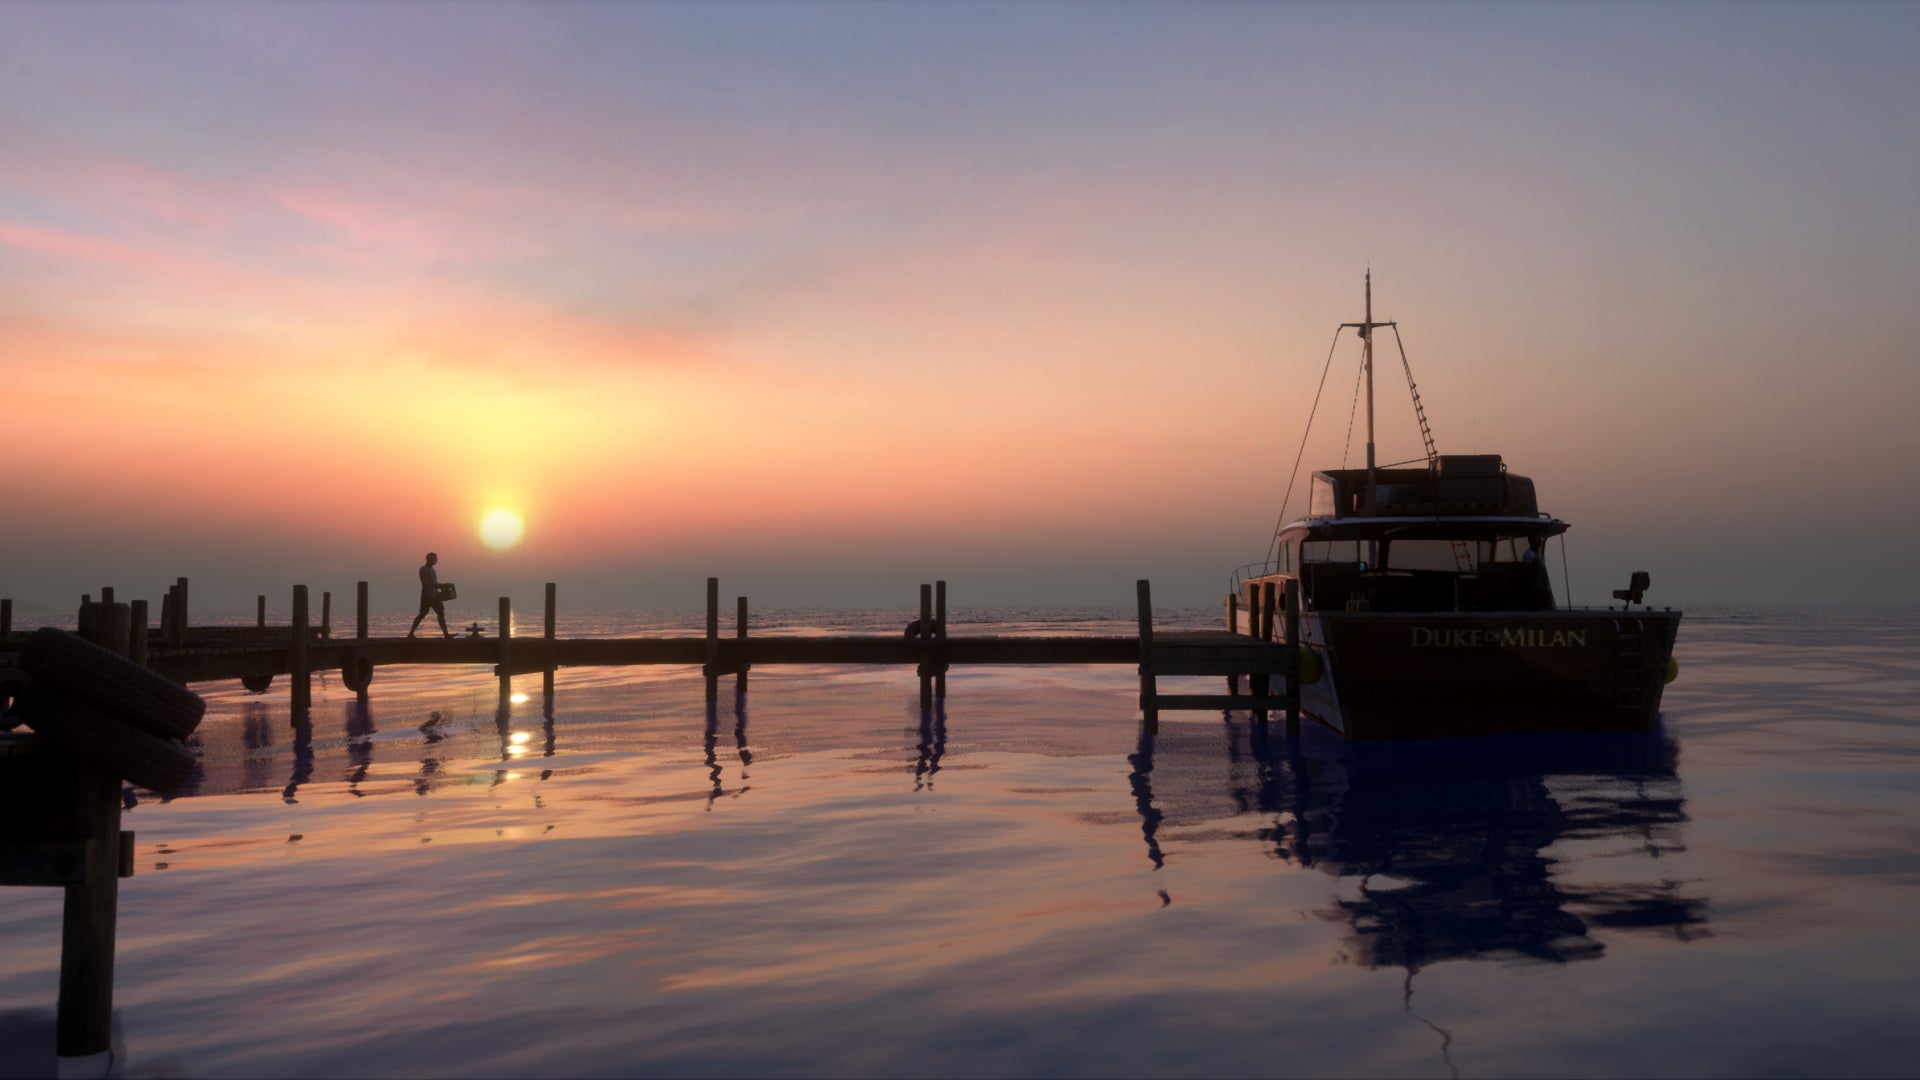 The Duke of Milan boat is shown at the end of the dock, with a sunset overhead, in Man of Medan.